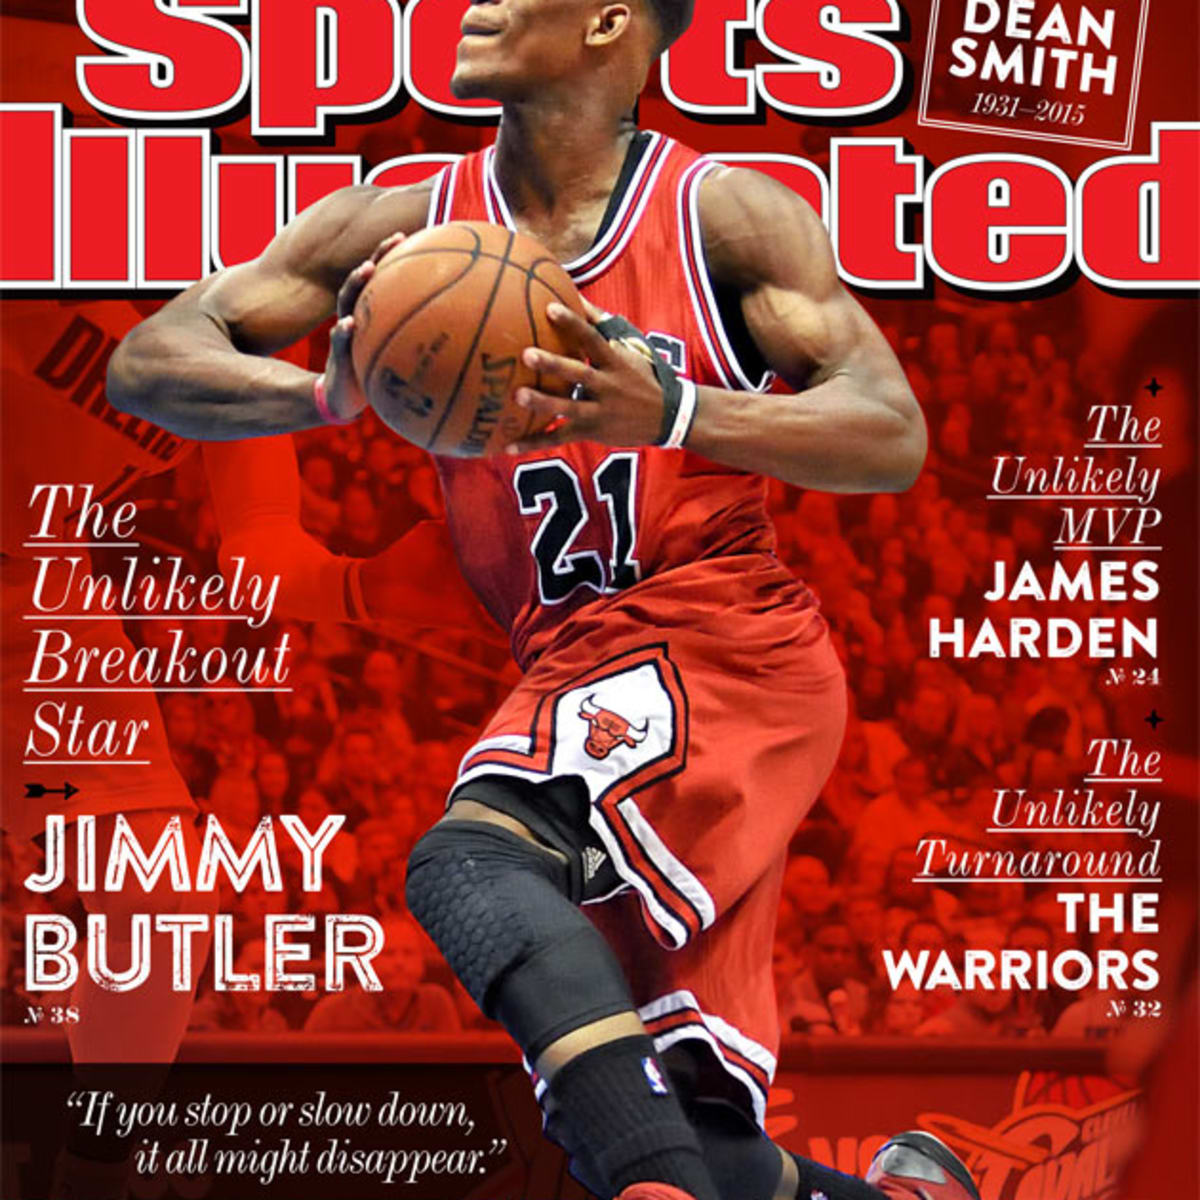 Jimmy Butler Crowns Himself King of the Playoffs - Sports Illustrated